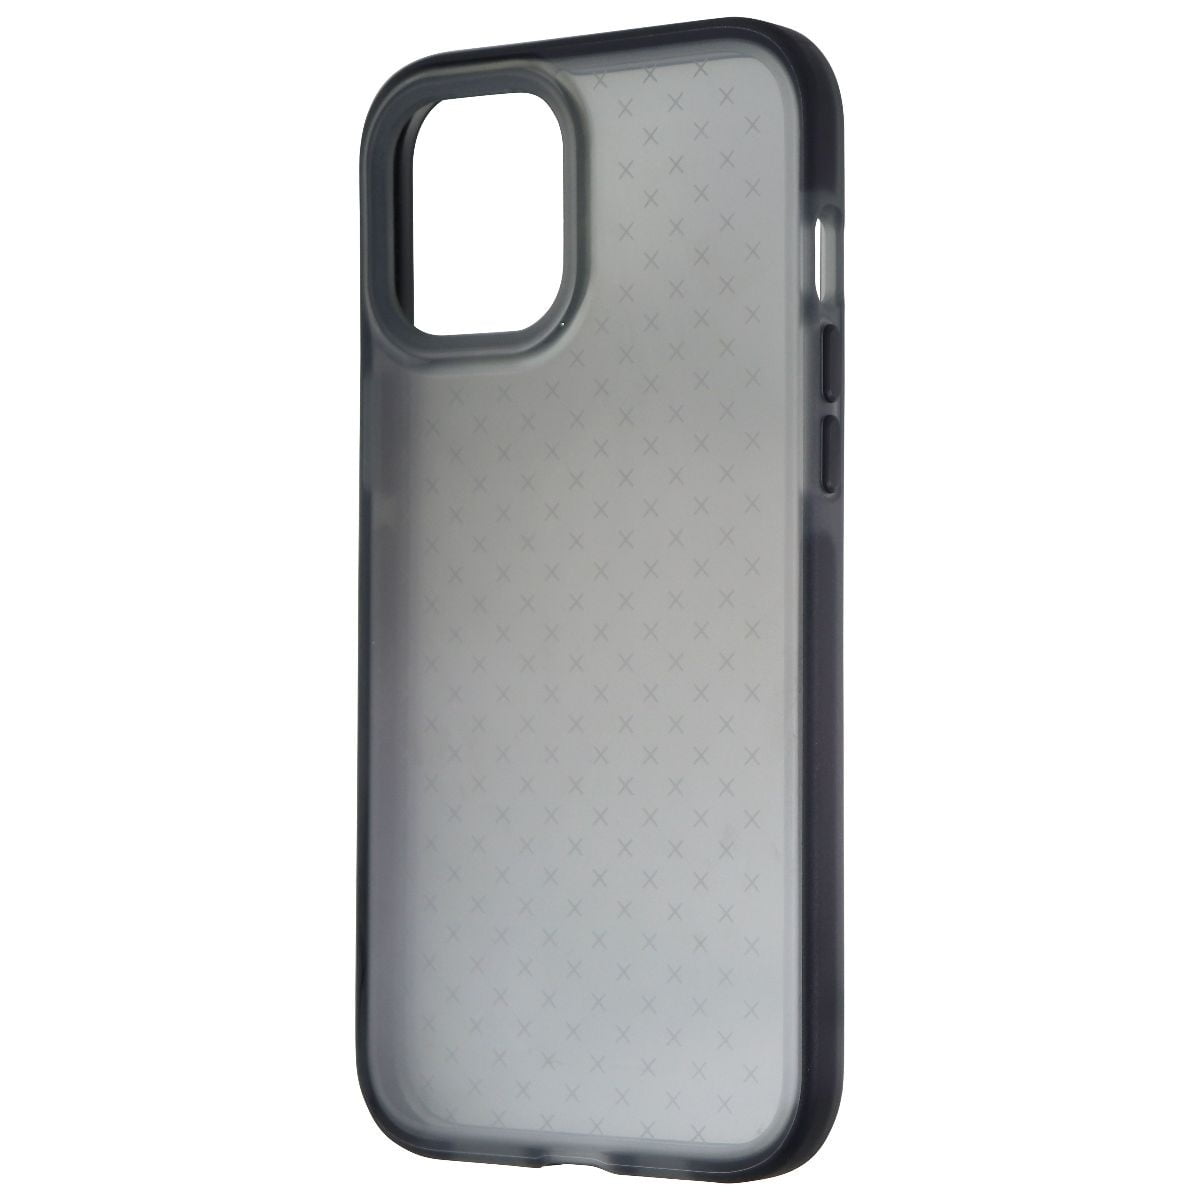  Tech21 Evo Check Gel Case for Apple iPhone 12 Pro Max